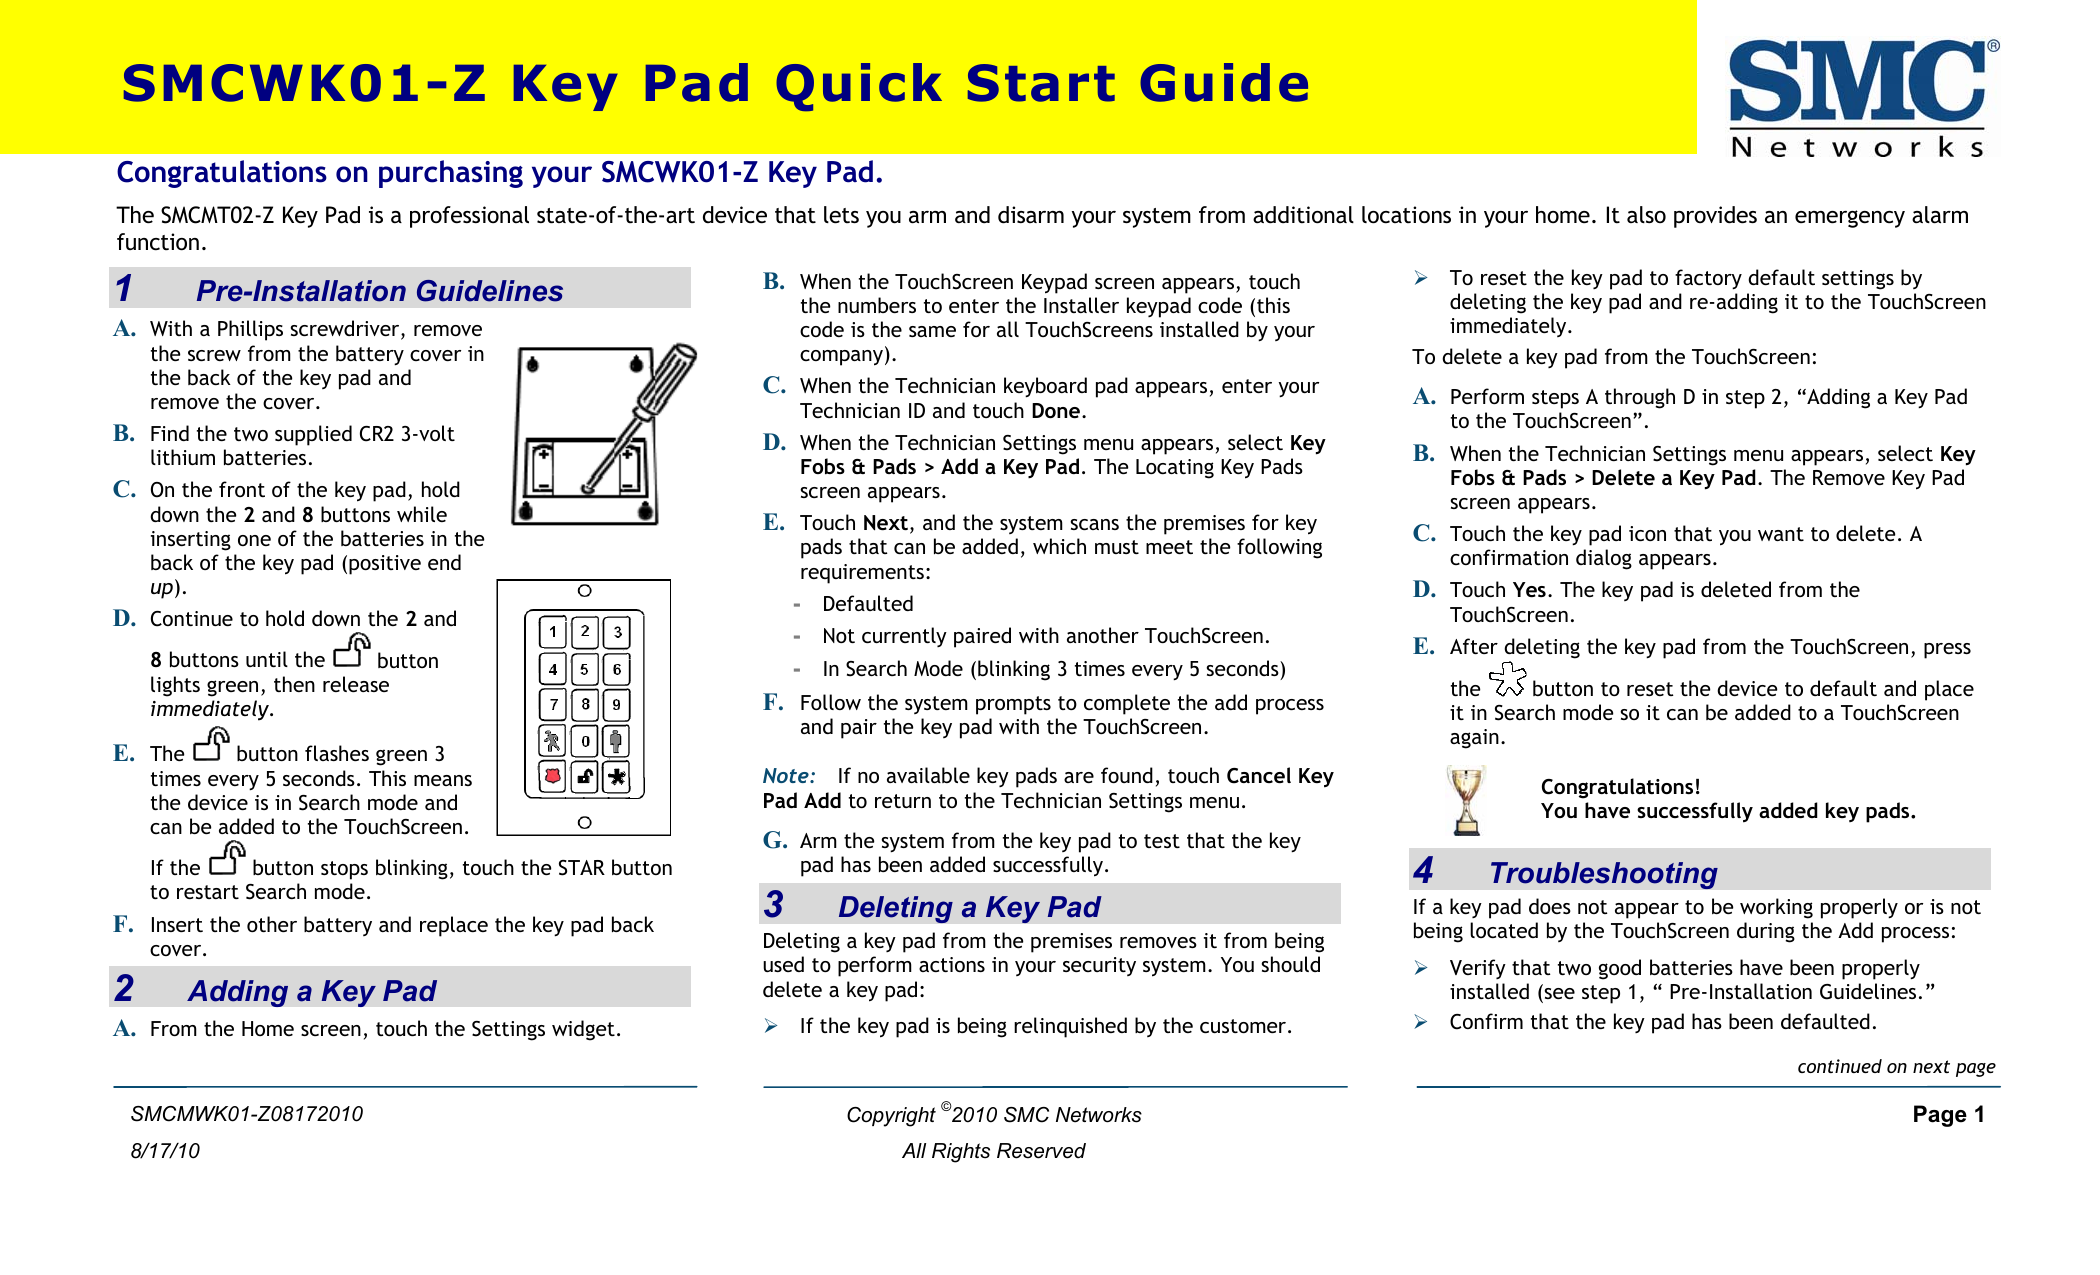  SMCWK01-Z Key Pad Quick Start Guide  Copyright ©2010 SMC Networks     Page 1  All Rights Reserved  SMCMWK01-Z08172010 8/17/10 1     Pre-Installation Guidelines A. With a Phillips screwdriver, remove the screw from the battery cover in the back of the key pad and remove the cover. B. Find the two supplied CR2 3-volt lithium batteries. C. On the front of the key pad, hold down the 2 and 8 buttons while inserting one of the batteries in thback of the key pad (positive end up). e D. Continue to hold down the 2 and 8 buttons until the   button lights green, then release immediately.  E. The   button flashes green 3 times every 5 seconds. This means the device is in Search mode and can be added to the TouchScreen. If the   button stops blinking, touch the STARto restart Search mode.  buttoF. Insert the other battery and replace the key pad back cover.  n 2    Adding a Key Pad A. From the Home screen, touch the Settings widget. B. When the TouchScreen Keypad screen appears, touch the numbers to enter the Installer keypad code (this code is the same for all TouchScreens installed by your company). C. When the Technician keyboard pad appears, enter your Technician ID and touch Done. D. When the Technician Settings menu appears, select Key Fobs &amp; Pads &gt; Add a Key Pad. The Locating Key Pads screen appears. E. Touch Next, and the system scans the premises for key pads that can be added, which must meet the following requirements: -  Defaulted -  Not currently paired with another TouchScreen. -  In Search Mode (blinking 3 times every 5 seconds) F. Follow the system prompts to complete the add process and pair the key pad with the TouchScreen. Note: If no available key pads are found, touch Cancel Key Pad Add to return to the Technician Settings menu.  G. Arm the system from the key pad to test that the key pa  hd  as been added successfully.3    Deleting a Key Pad Deleting a key pad from the premises removes it from being used to perform actions in your security system. You should delete a key pad:  If the key pad is being relinquished by the customer. ¾¾ To reset the key pad to factory default settings by deleting the key pad and re-adding it to the TouchScreen immediately. Congratulations on purchasing your SMCWK01-Z Key Pad. The SMCMT02-Z Key Pad is a professional state-of-the-art device that lets you arm and disarm your system from additional locations in your home. It also provides an emergency alarm function.  To delete a key pad from the TouchScreen:  A. Perform steps A through D in step 2, “Adding a Key Pad to the TouchScreen”. B. When the Technician Settings menu appears, select Key Fobs &amp; Pads &gt; Delete a Key Pad. The Remove Key Pad screen appears. C. Touch the key pad icon that you want to delete. A confirmation dialog appears. D. Touch Yes. The key pad is deleted from the TouchScreen. E. After deleting the key pad from the TouchScreen, press the   button to reset the device to default and place it in Search mode so it can be added to a TouchScreen again.  4    Troubleshooting If a key pad does not appear to be working properly or is not being located by the TouchScreen during the Add process: ¾ Verify that two good batteries have been properly installed (see step 1, “ .”  Pre-Installation Guidelines¾ Confirm that the key pad has been defaulted.   Congratulations! You have successfully added key pads. continued on next page 